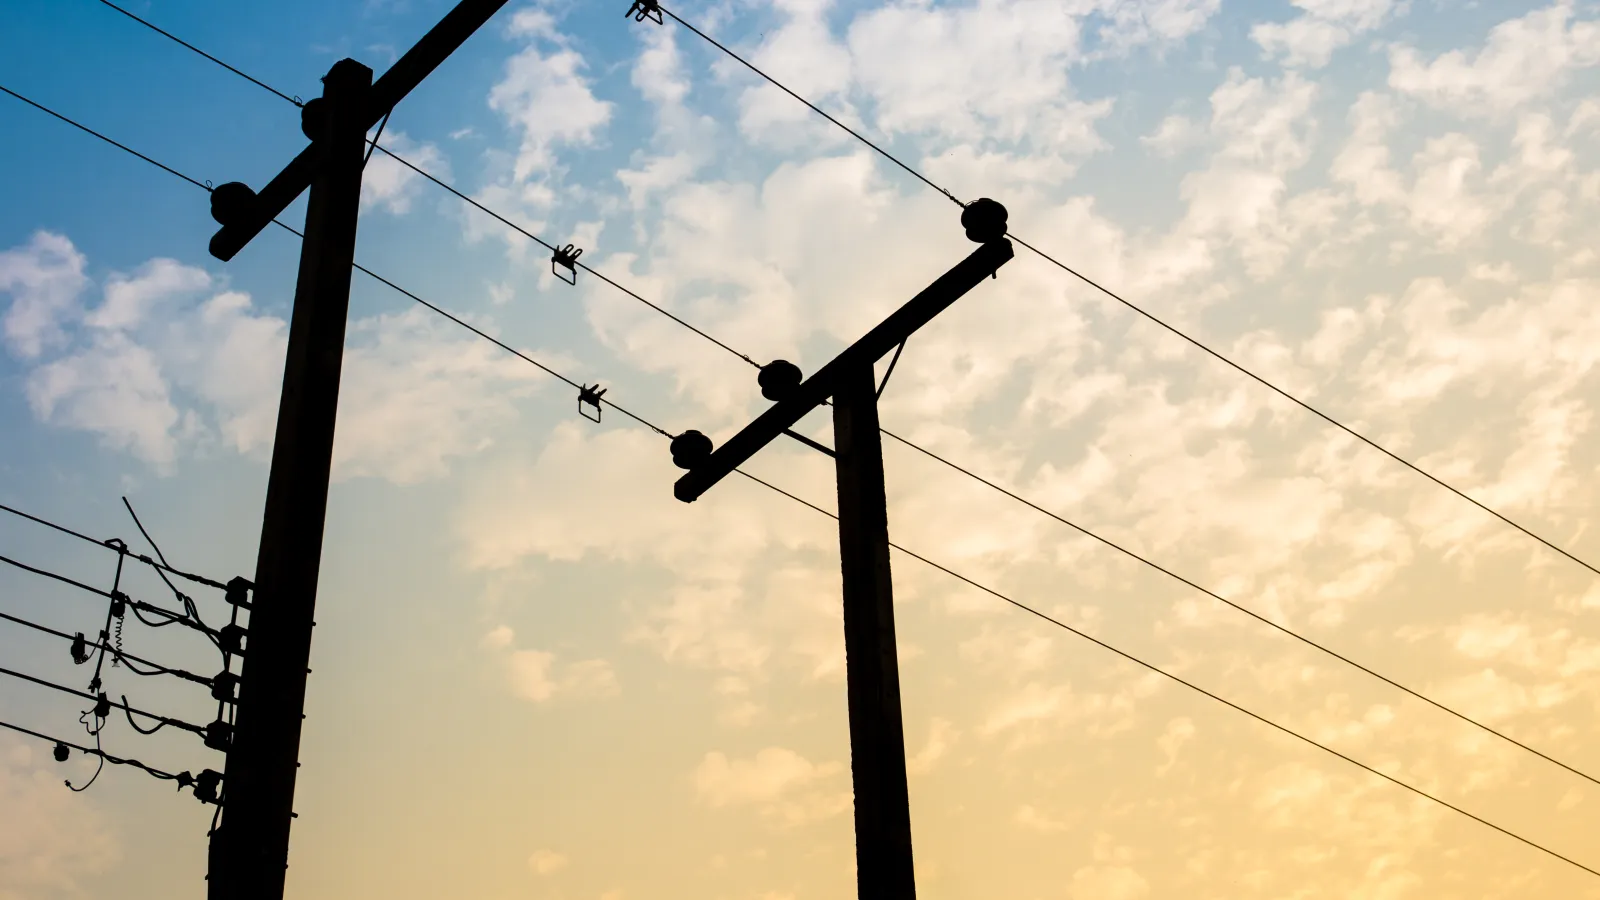 a group of power lines